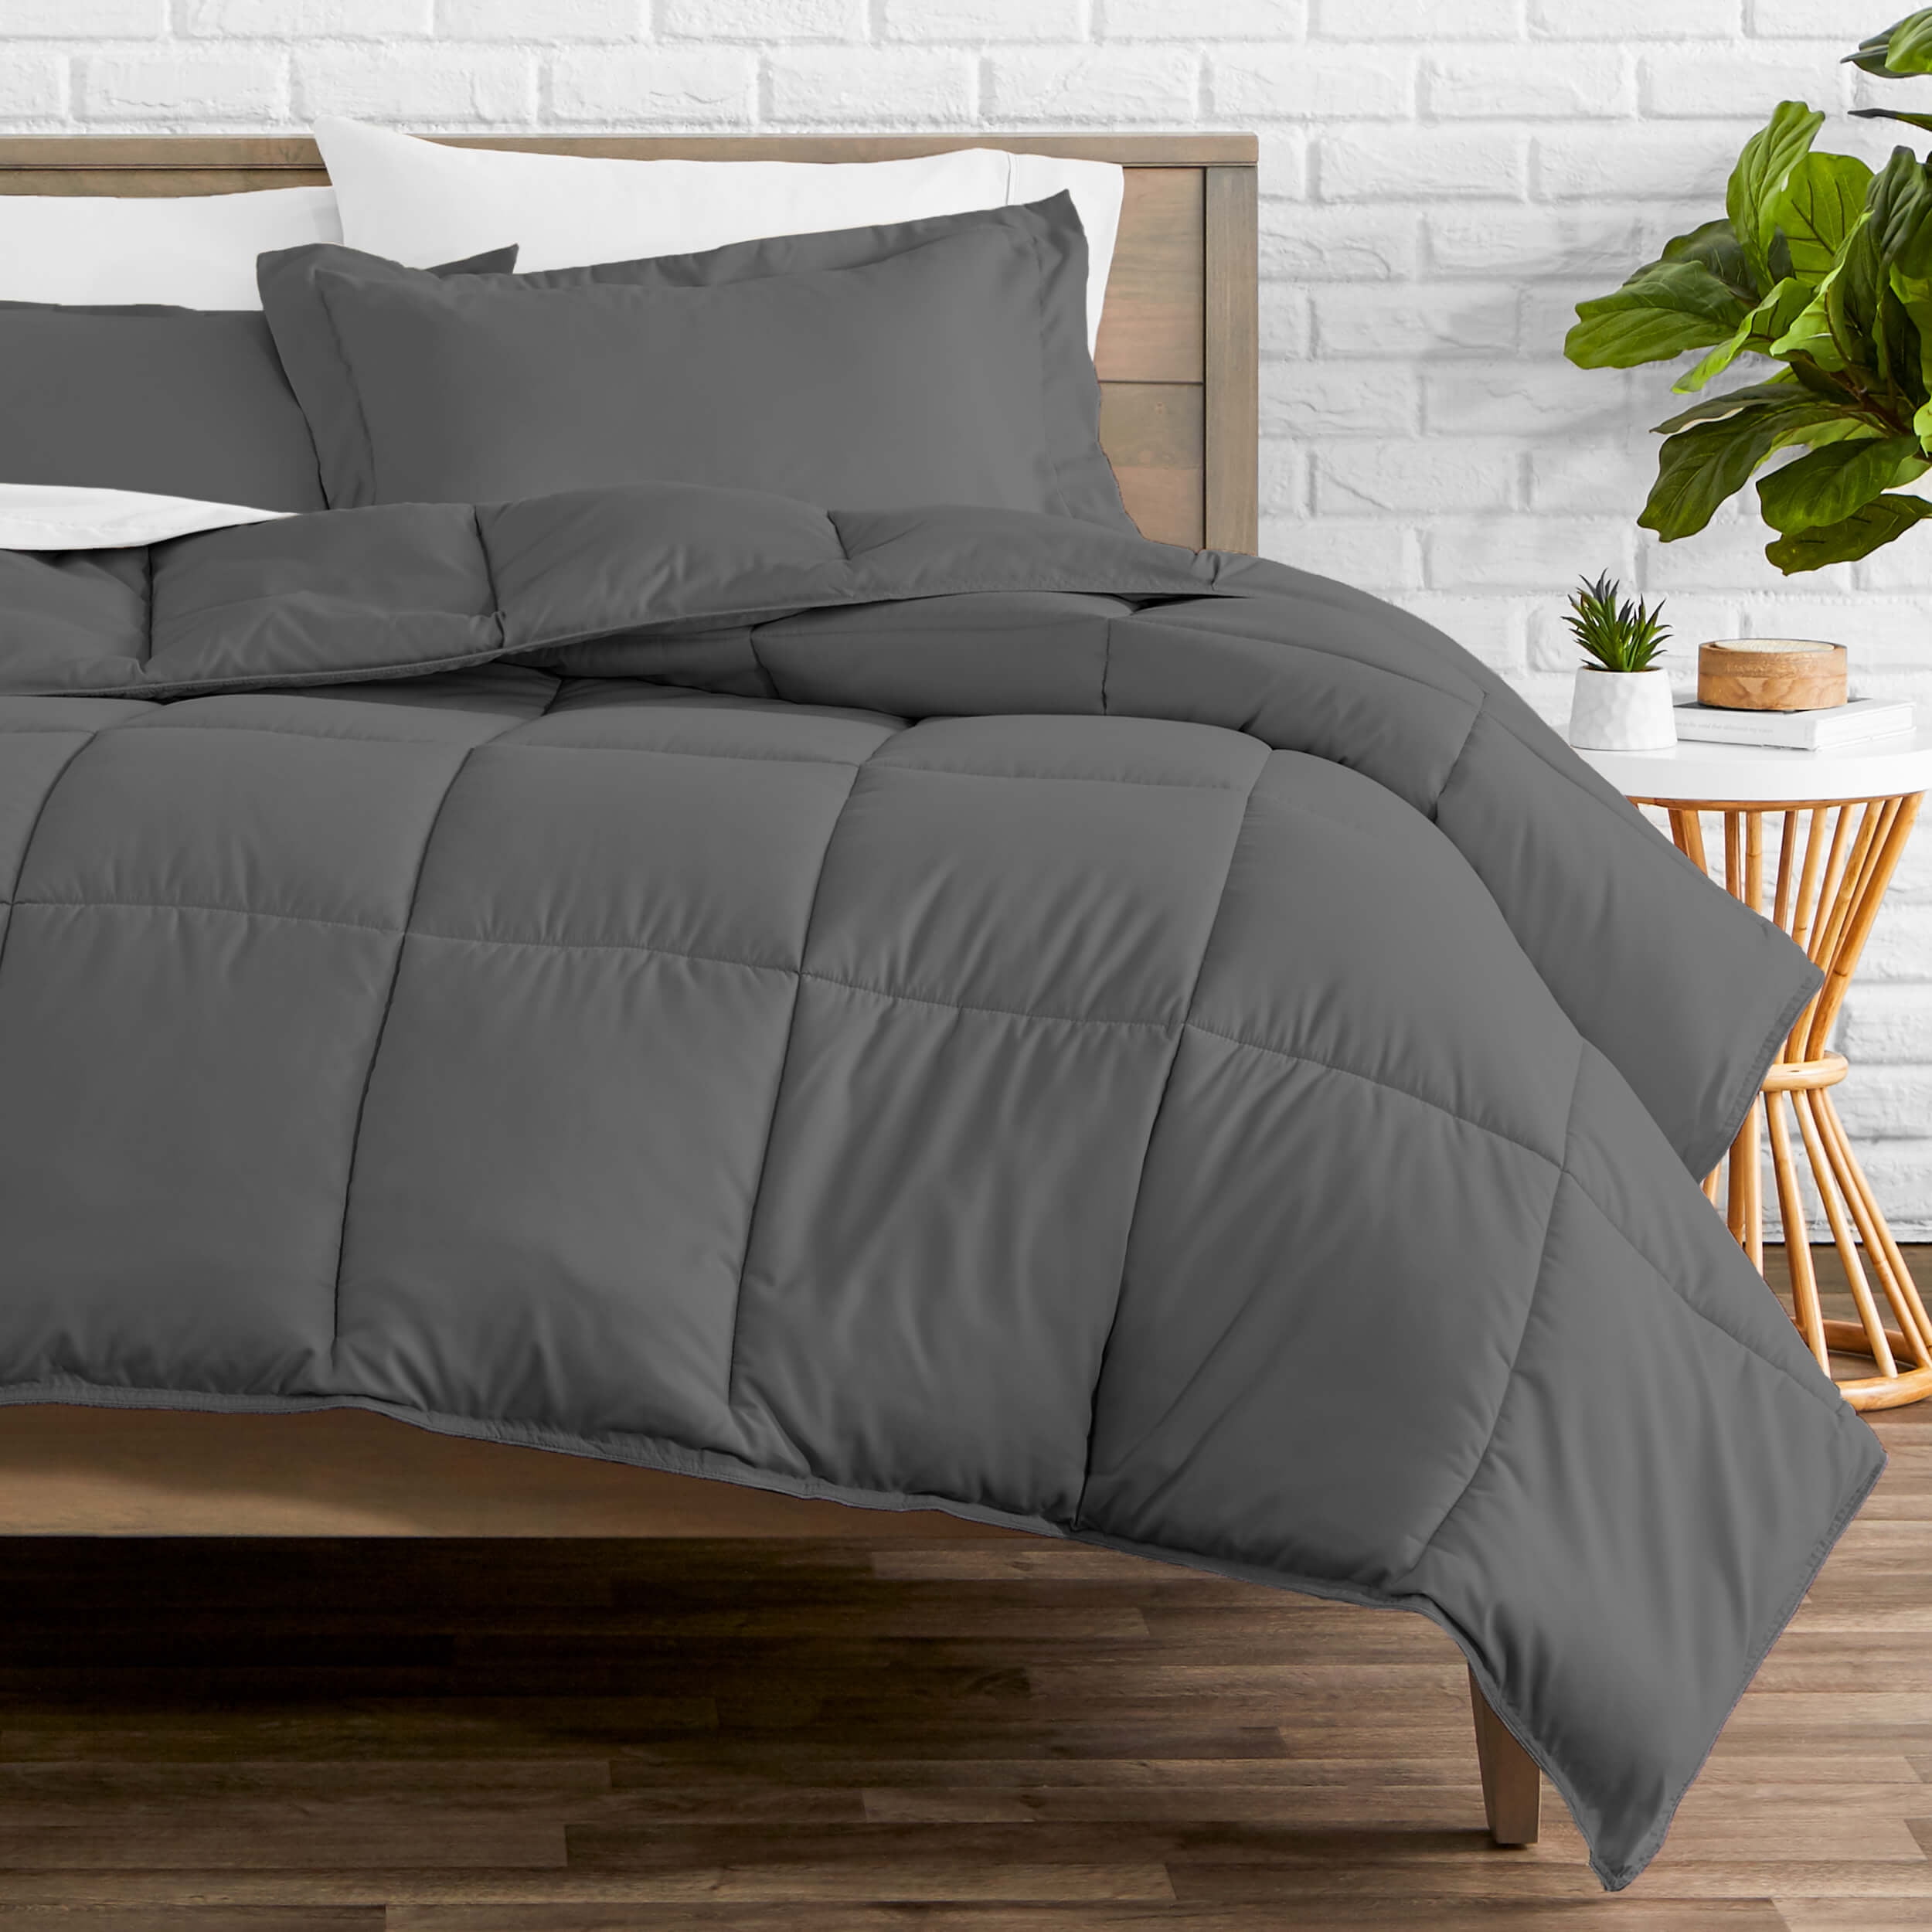 Details about   COOSLEEP HOME Down Alternative Queen Comforter with Corner Tabs-All Season Soft